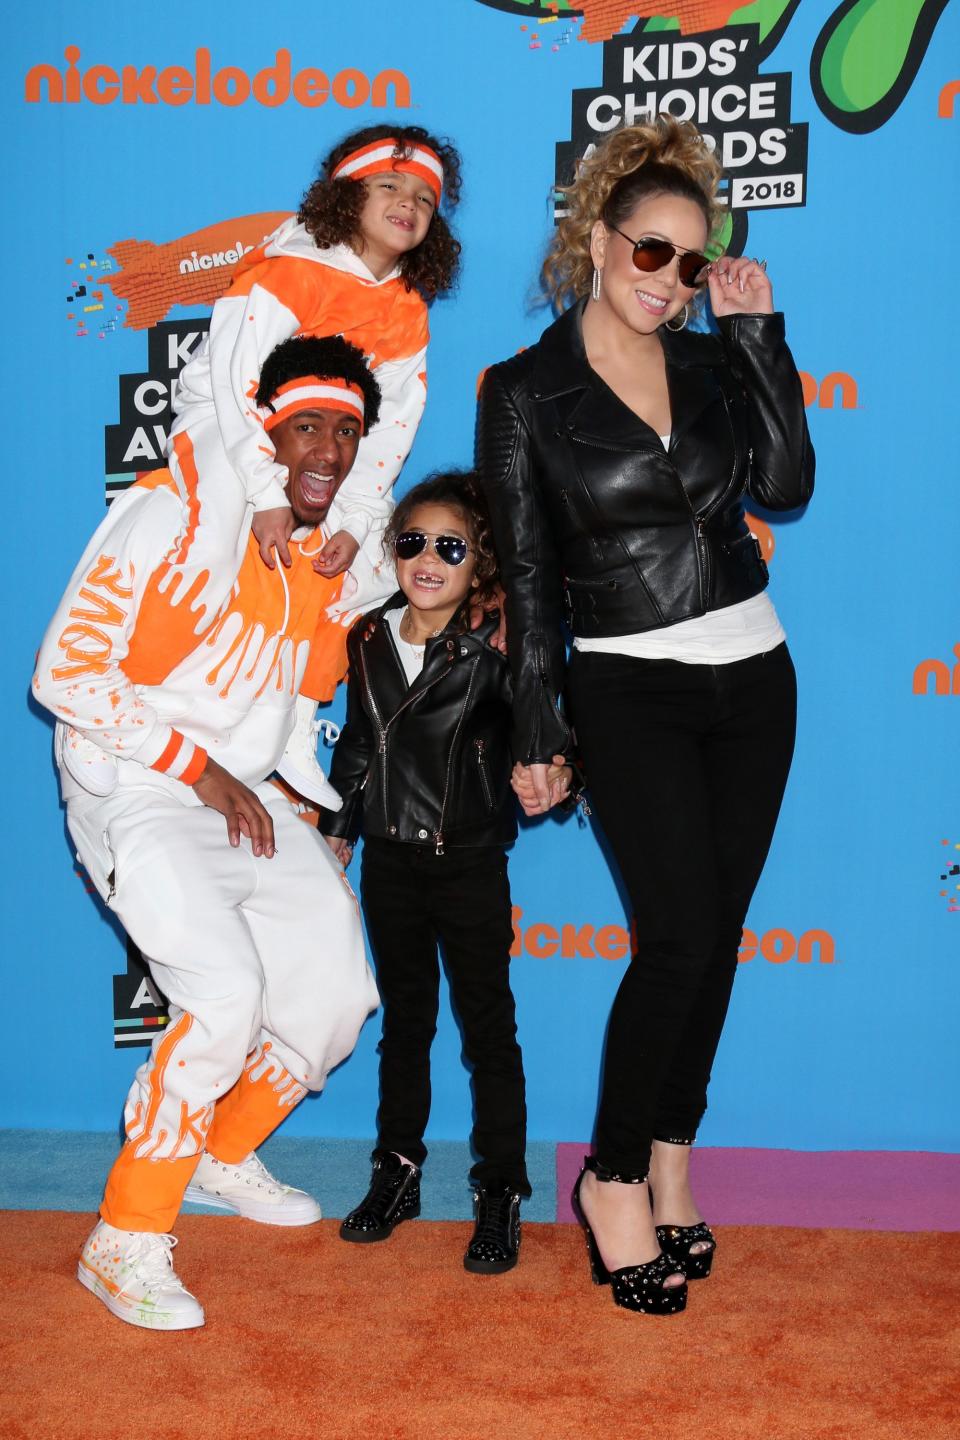 Nick Cannon, Moroccan Cannon, Mariah Carey, Monroe Cannon at arrivals for Nickelodeon''s 2018 Kids'' Choice Awards, The Forum, Inglewood, CA March 24, 2018. Photo By: Priscilla Grant/Everett Collection